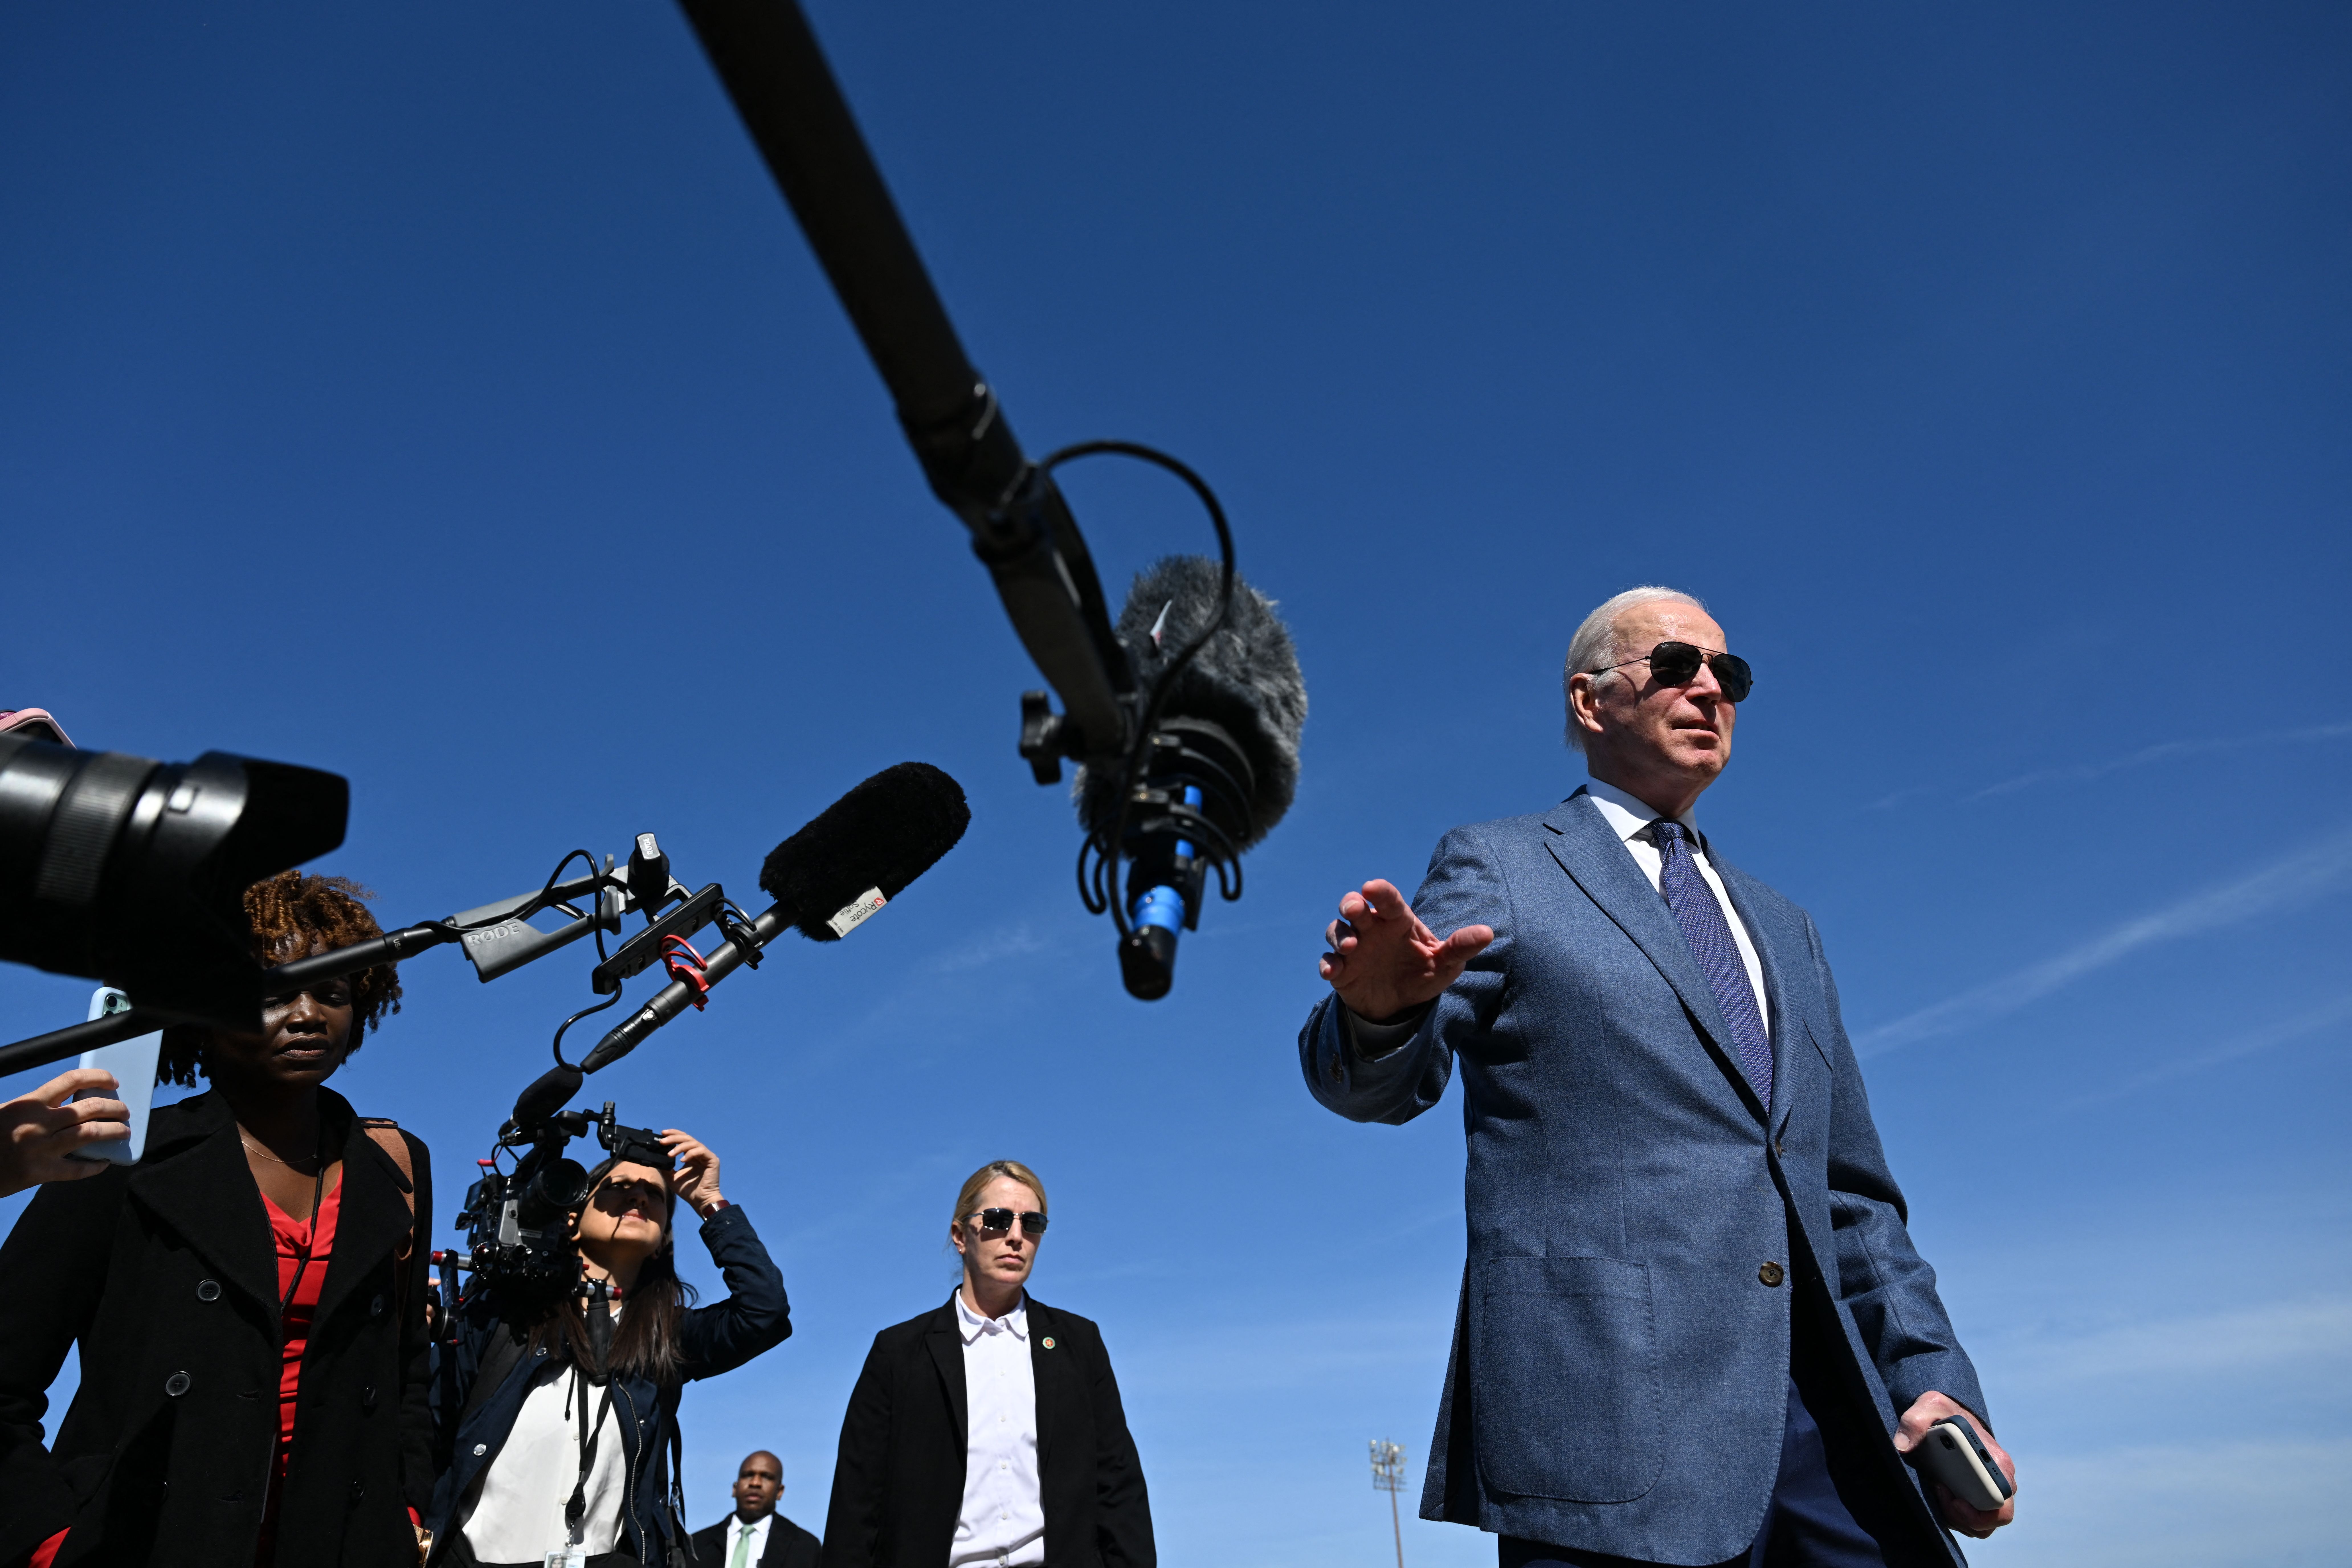 US President Joe Biden speaks to the press before boarding Air Force One, as he departs for Northern Ireland, at Joint Base Andrews in Maryland on April 11, 2023. (Photo by Jim WATSON / AFP) (Photo by JIM WATSON/AFP via Getty Images)